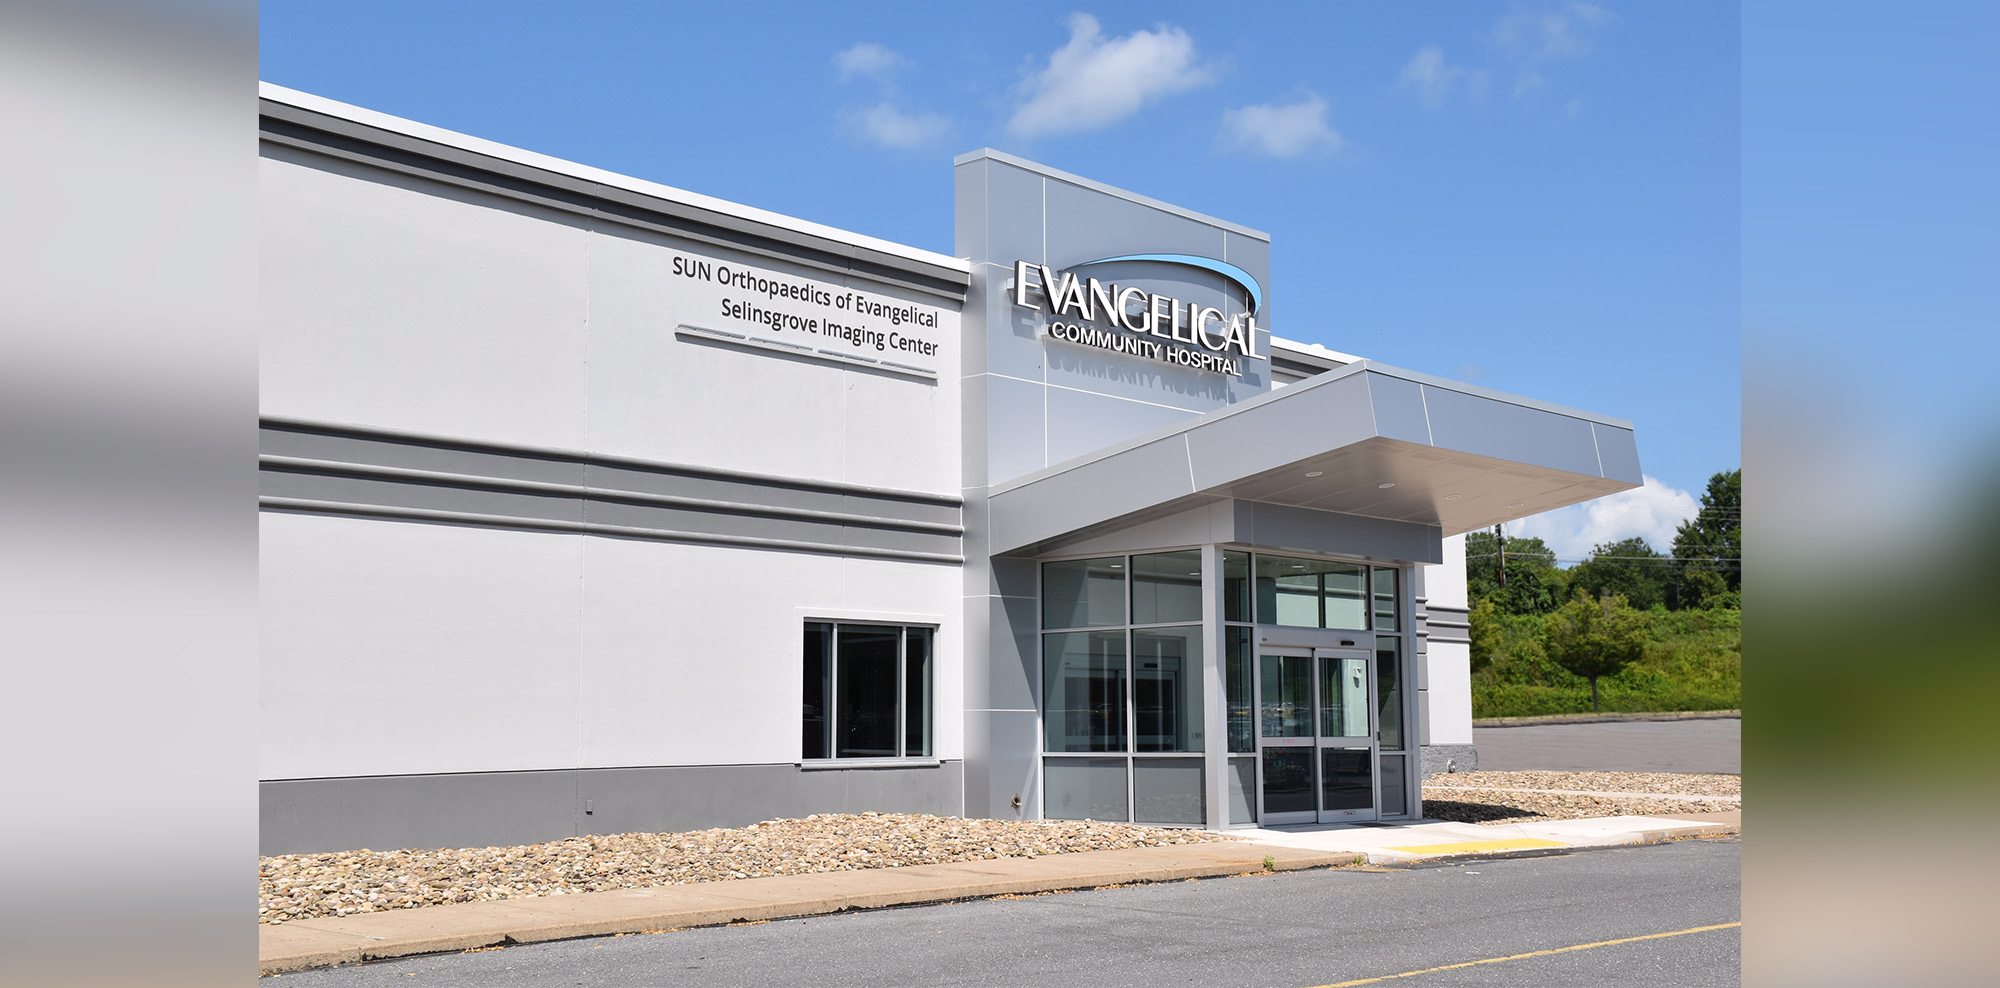 Evangelical Community Hospital Opens Orthopaedic and Imaging Services at Mall Location